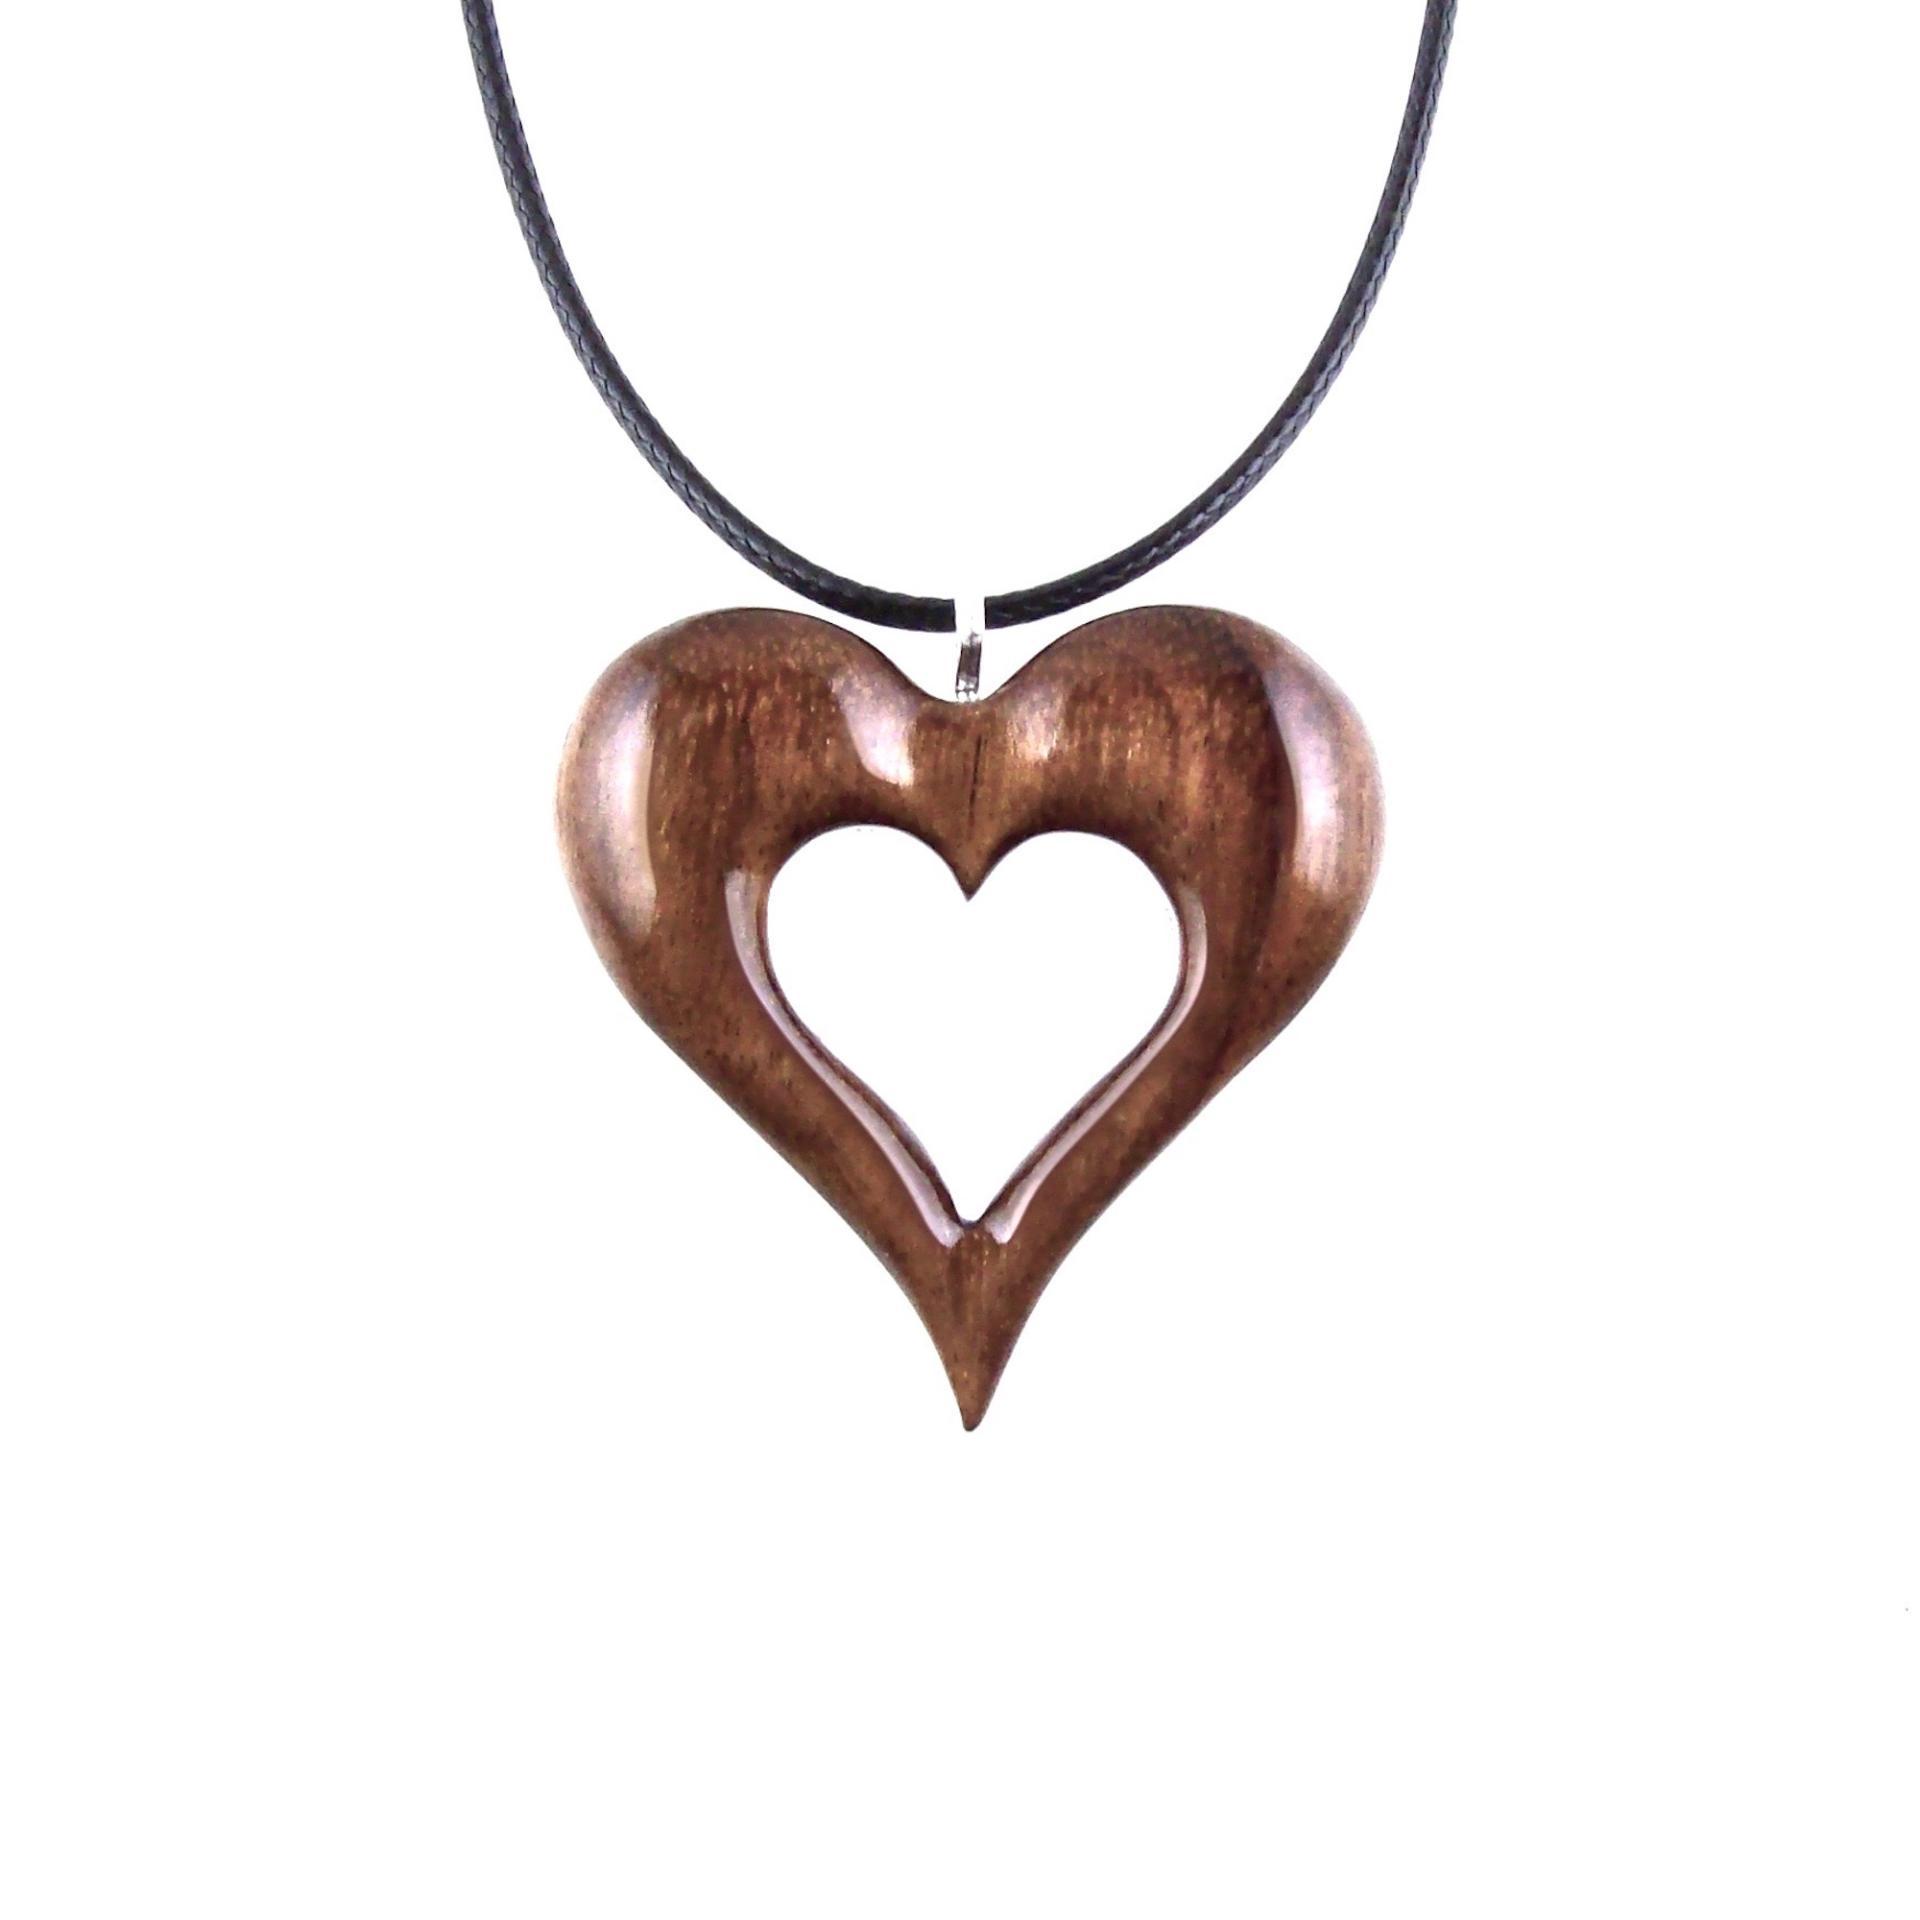 Wood Heart Necklace, Wooden Heart Pendant, Hand Carved 5th Anniversary Gift for Her, One of a Kind Handmade Jewelry